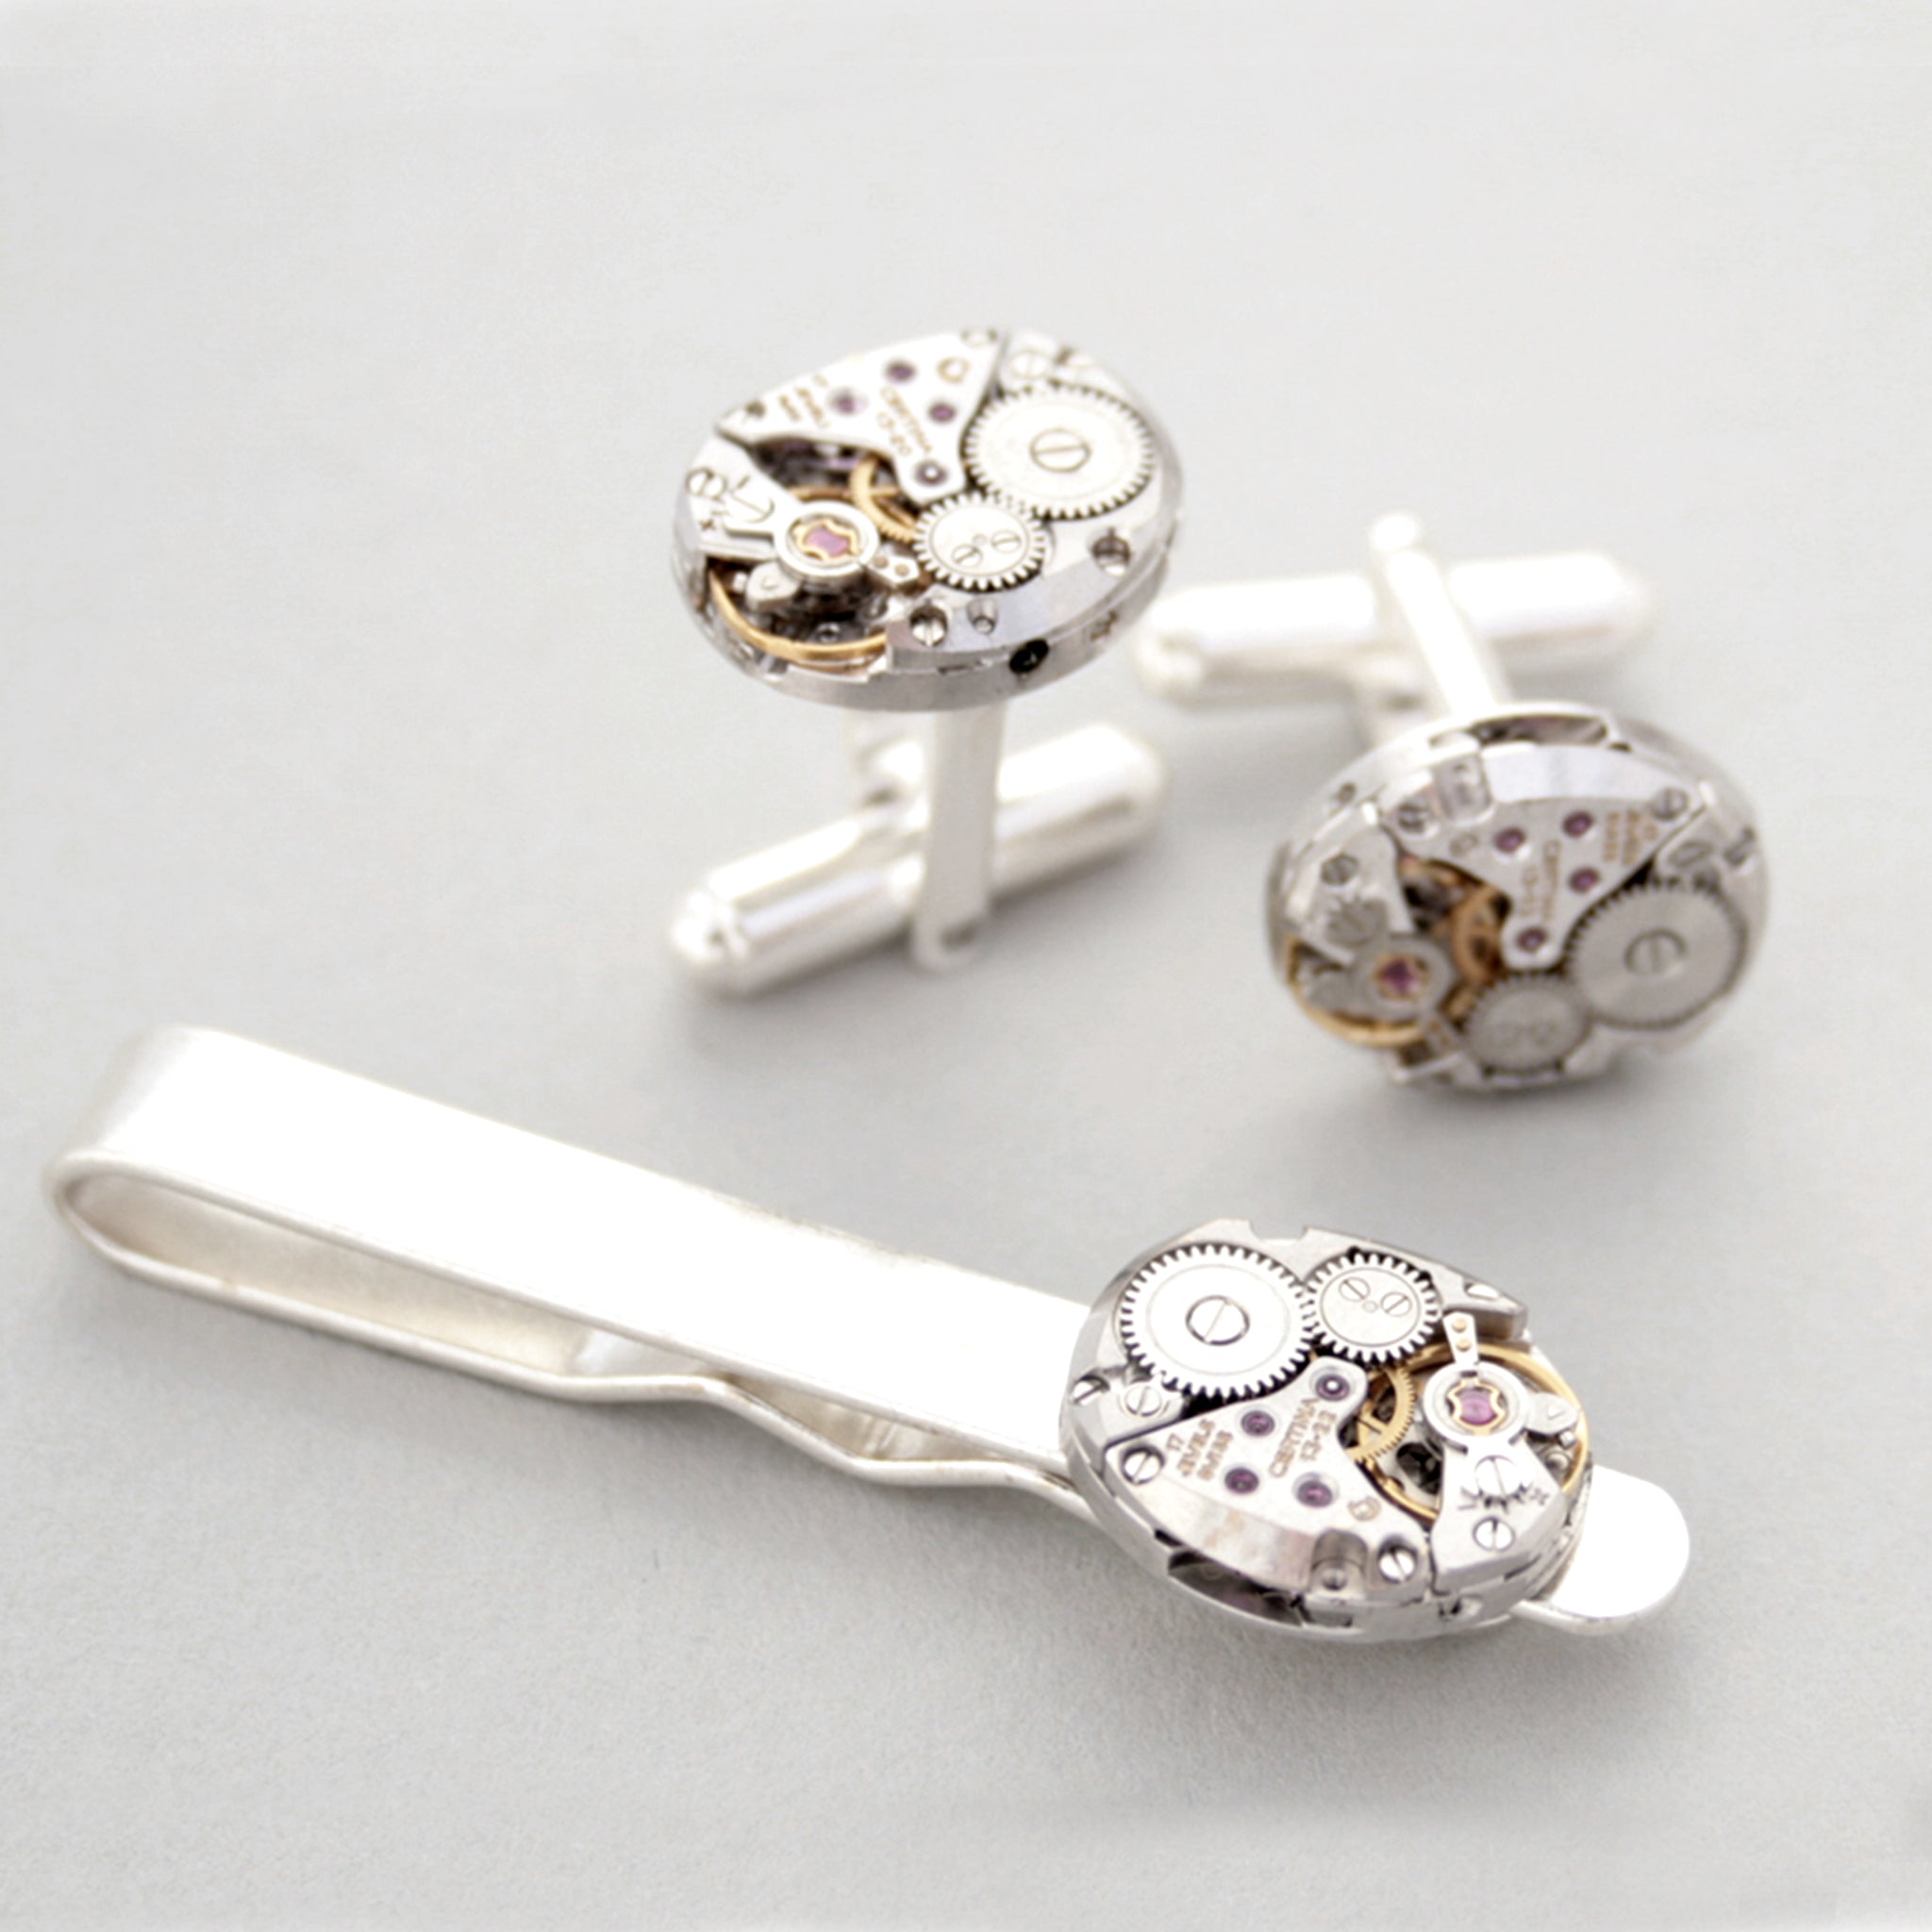 Sterling Cufflinks and Tie Clip Set